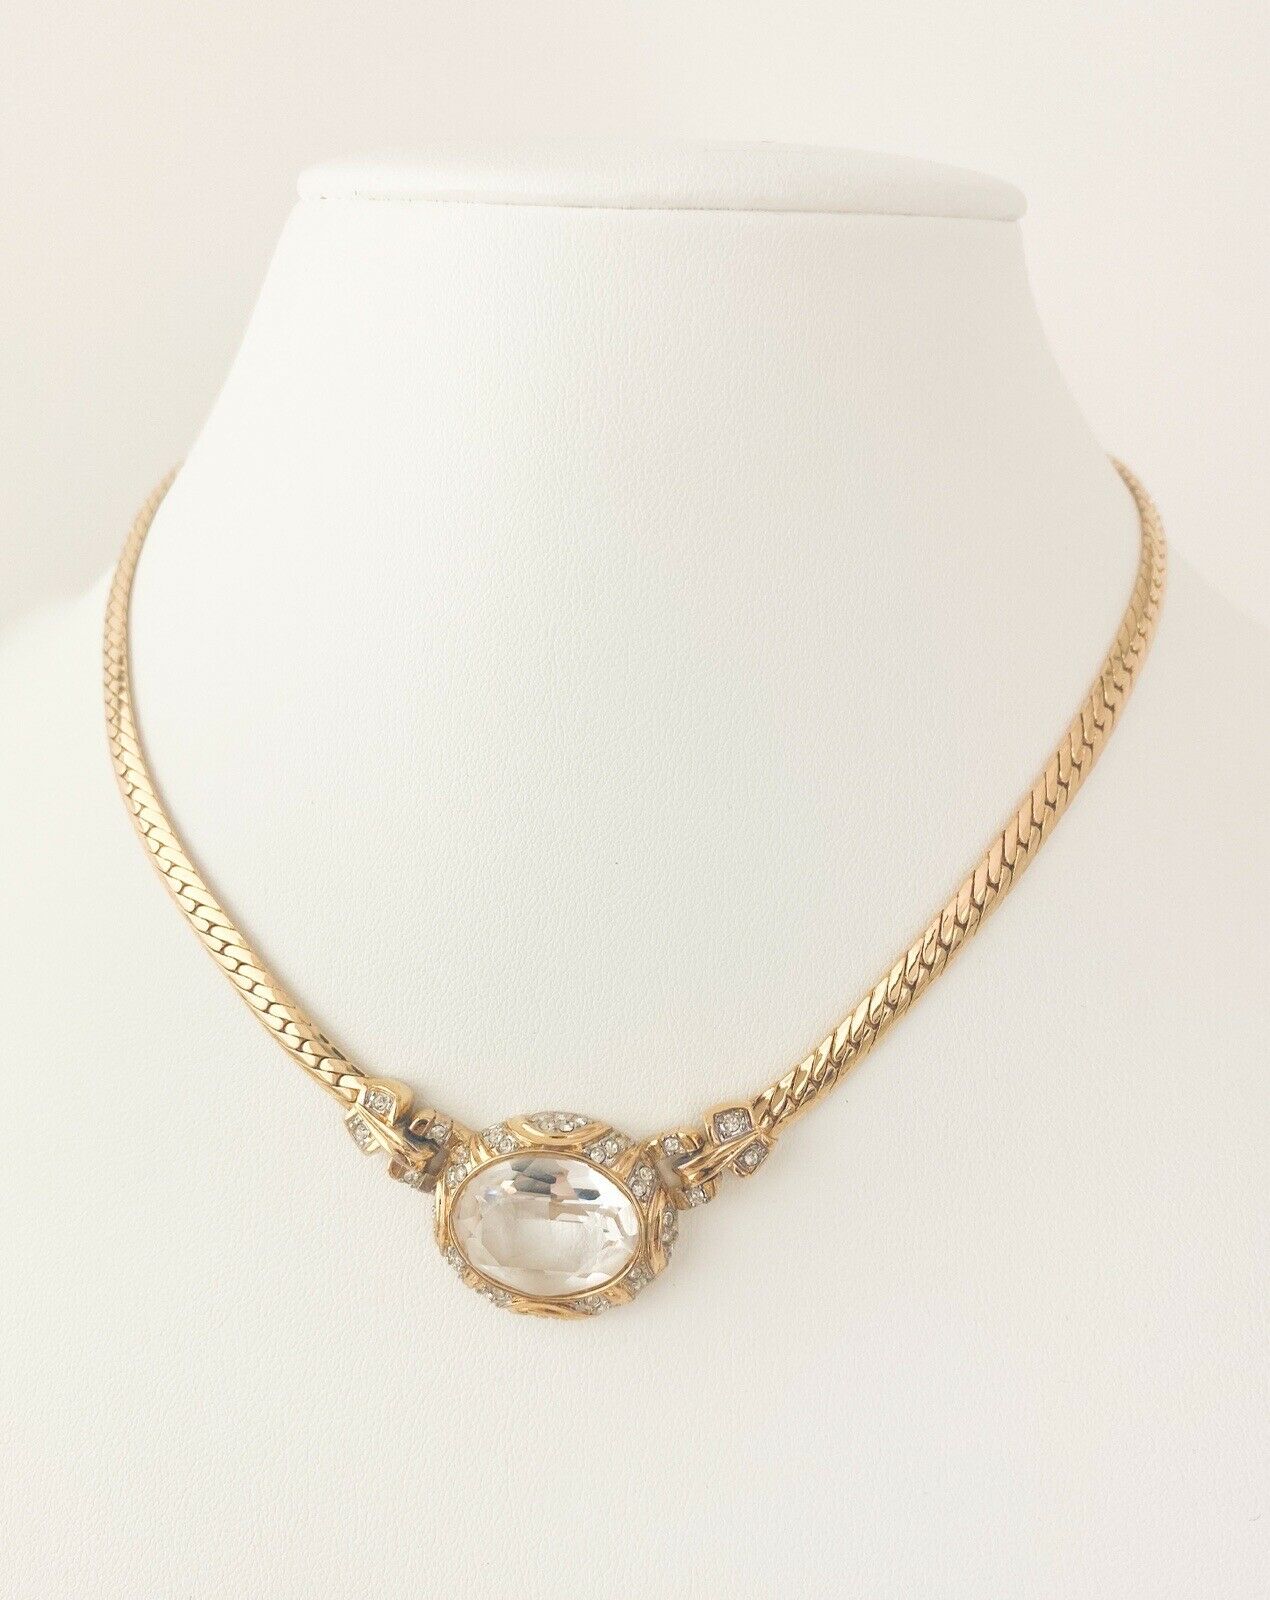 【SOLD OUT】Nina Ricci Gold Tone Vintage Choker Necklace Crystal Rhinestone Gorgeous